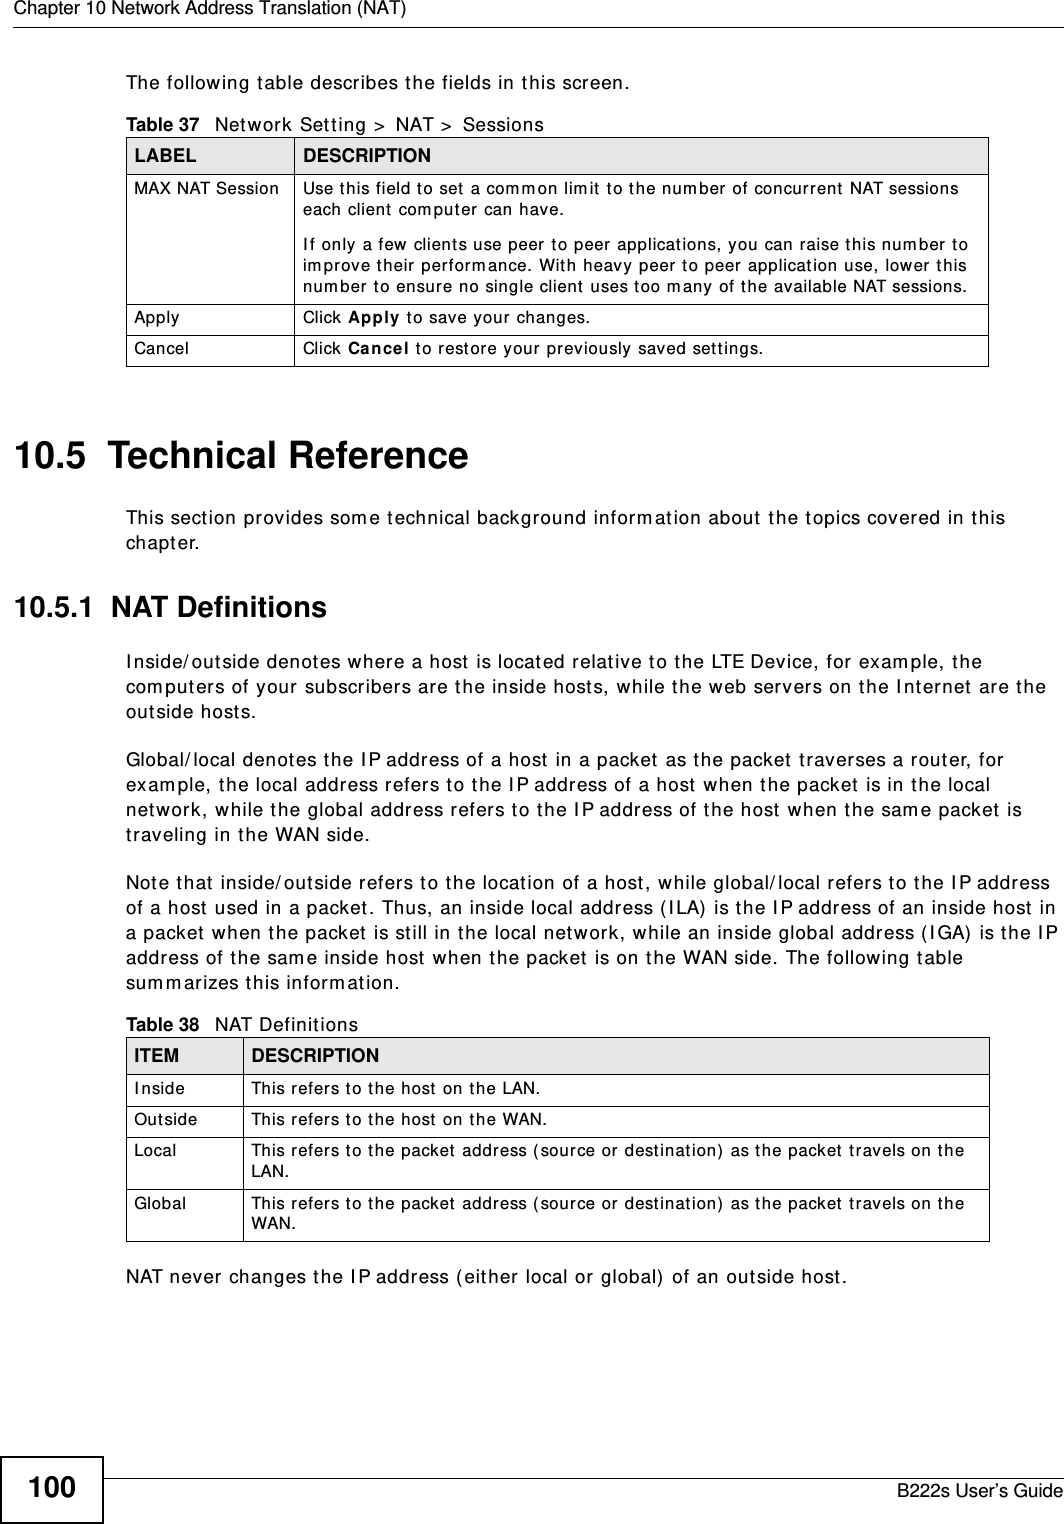 Chapter 10 Network Address Translation (NAT)B222s User’s Guide100The following t able describes t he fields in t his screen.10.5  Technical ReferenceThis sect ion provides som e t echnical background inform ation about t he t opics covered in t his chapt er.10.5.1  NAT DefinitionsI nside/ out side denot es where a host is located relat ive t o t he LTE Device, for exam ple, t he com puters of your subscribers are the inside hosts, while t he web servers on the I nt ernet  are the out side host s. Global/ local denot es the I P address of a host  in a packet  as t he packet traverses a r out er, for exam ple, t he local address refers t o the I P address of a host  when the packet is in t he local network, while t he global address refers t o t he I P address of t he host w hen t he sam e packet  is traveling in t he WAN side. Note that  inside/ out side refers t o t he locat ion of a host , while global/ local refers t o the I P address of a host used in a packet . Thus, an inside local addr ess ( I LA)  is the I P addr ess of an inside host in a packet  when t he packet  is st ill in t he local network, while an inside global address ( I GA)  is t he I P address of the sam e inside host when t he packet  is on t he WAN side. The following t able sum m arizes t his inform ation.NAT never changes the I P addr ess ( either local or global)  of an out side host.Table 37   Network Sett ing &gt;  NAT &gt;  SessionsLABEL DESCRIPTIONMAX NAT Session Use this field to set a com m on lim it  t o t he num ber of concurrent  NAT sessions each client  com put er can have.I f only a few clients use peer t o peer applications, you can raise t his num ber t o im prove t heir perform ance. With heavy peer to peer applicat ion use, lower t his num ber t o ensure no single client uses t oo m any of t he available NAT sessions.Apply Click Apply t o save your  changes.Cancel Click Ca nce l t o rest ore your  previously saved set t ings.Table 38   NAT Definit ionsITEM DESCRIPTIONI nside This refers t o t he host on t he LAN.Outside This refers t o t he host  on t he WAN.Local This refers t o t he packet  addr ess ( sour ce or dest inat ion)  as t he packet  travels on t he LAN.Global This refers t o t he packet address ( sour ce or dest inat ion)  as t he packet  travels on t he WAN.